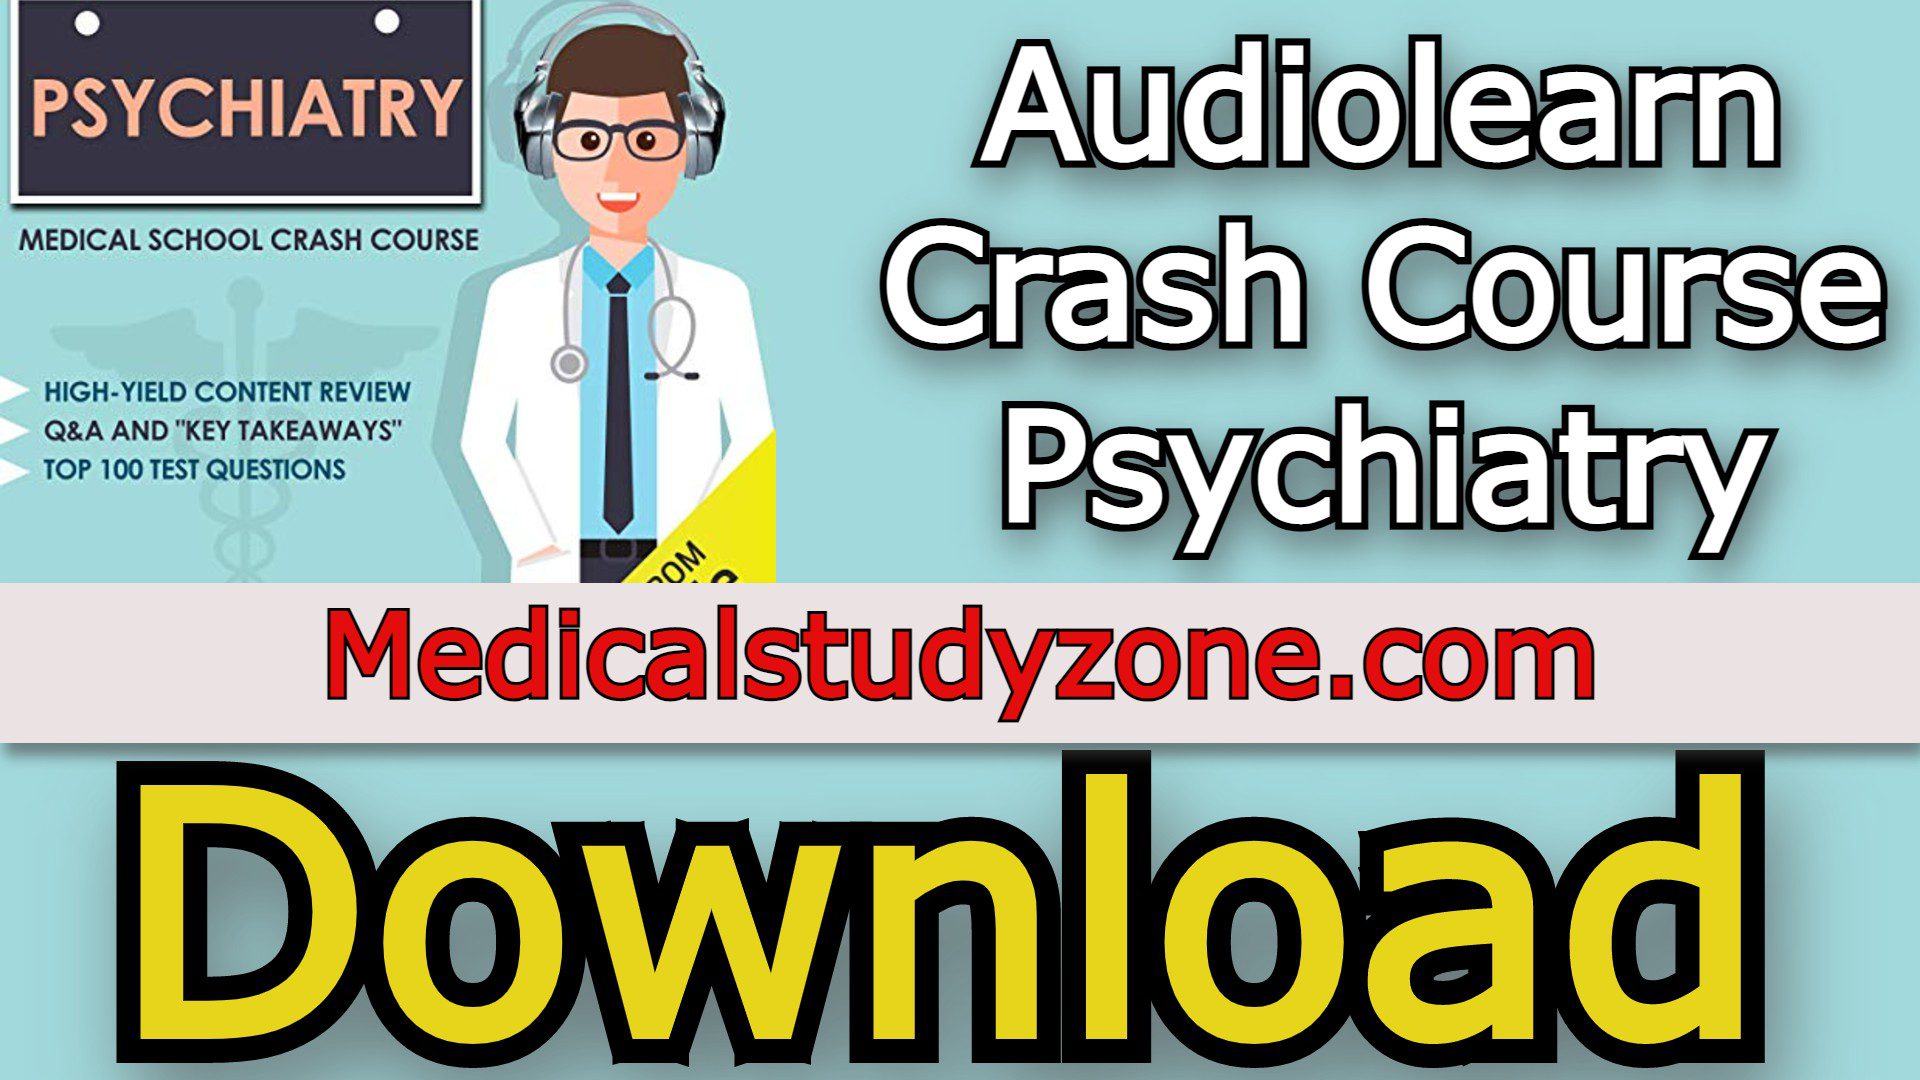 Audiolearn Crash Course Psychiatry 2021 Free Download